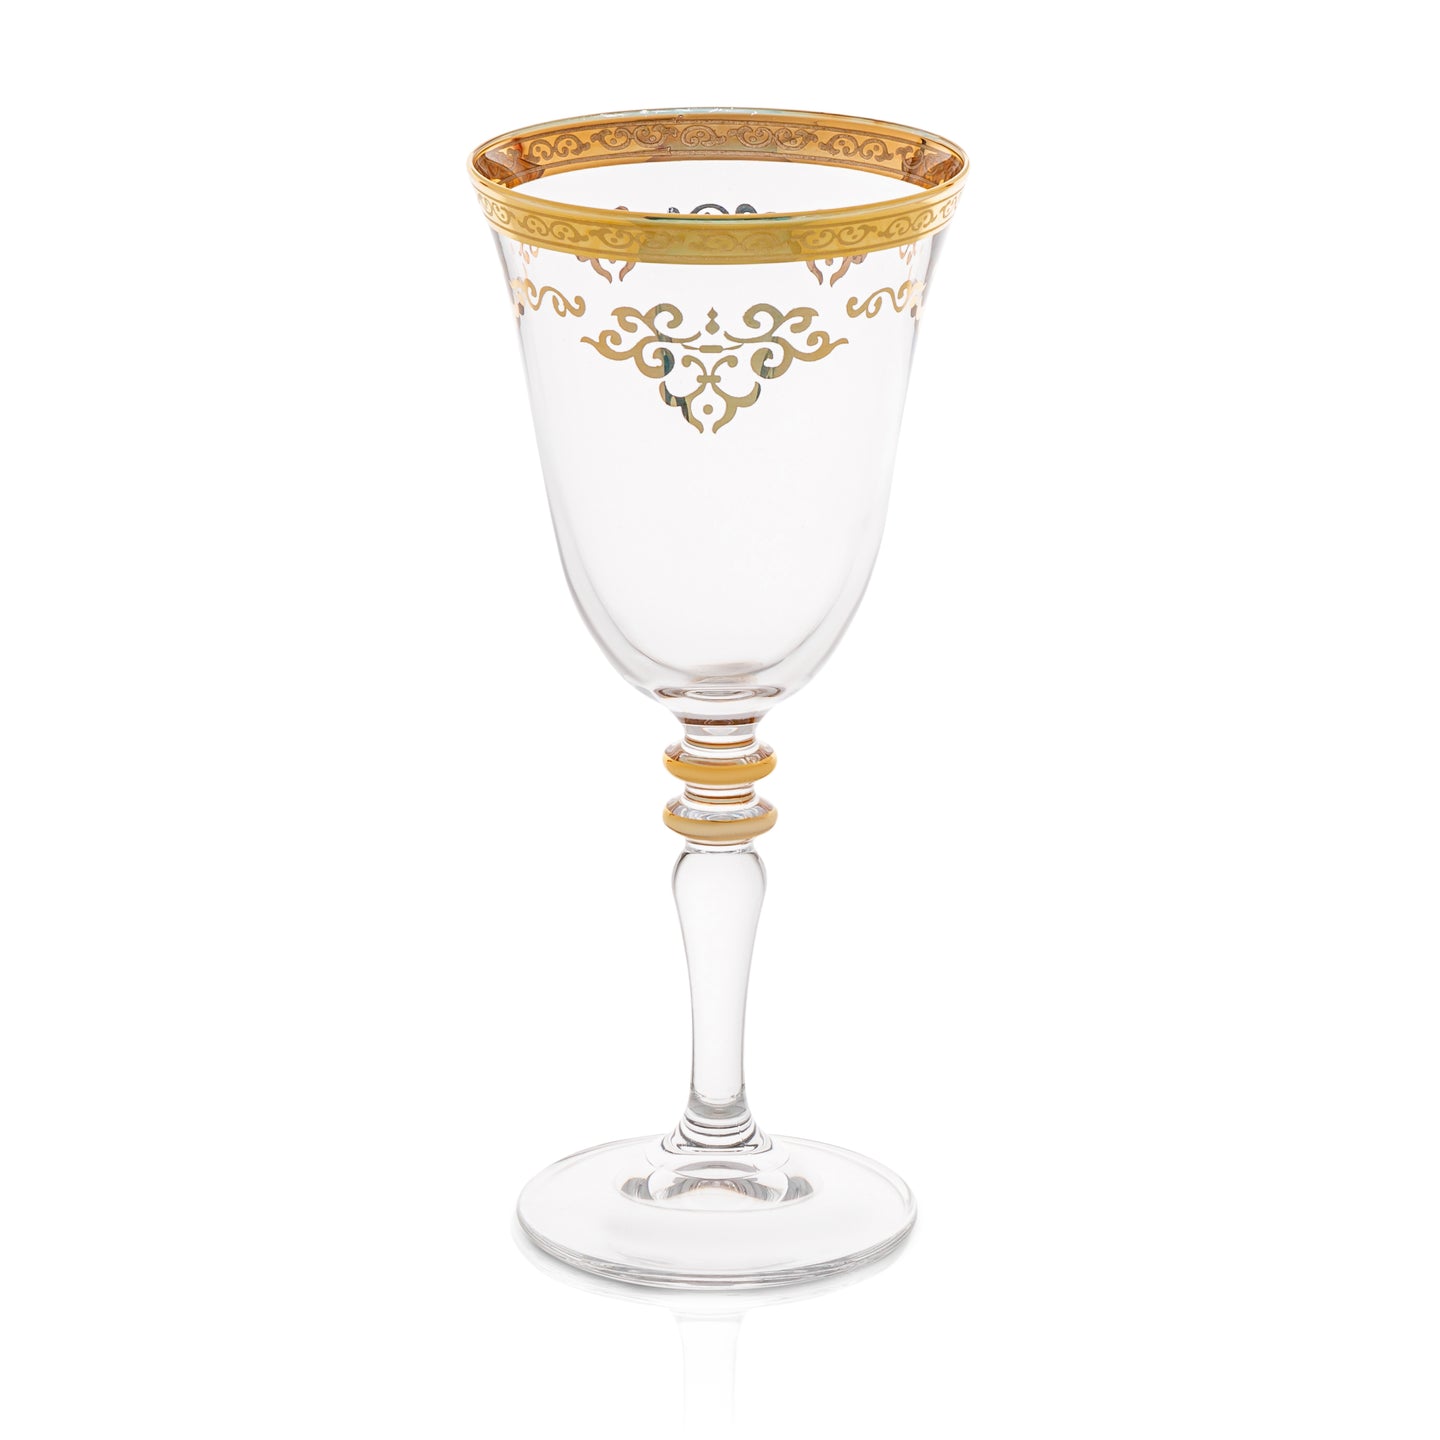 Set of 6 Water Glasses with Rich Gold Design